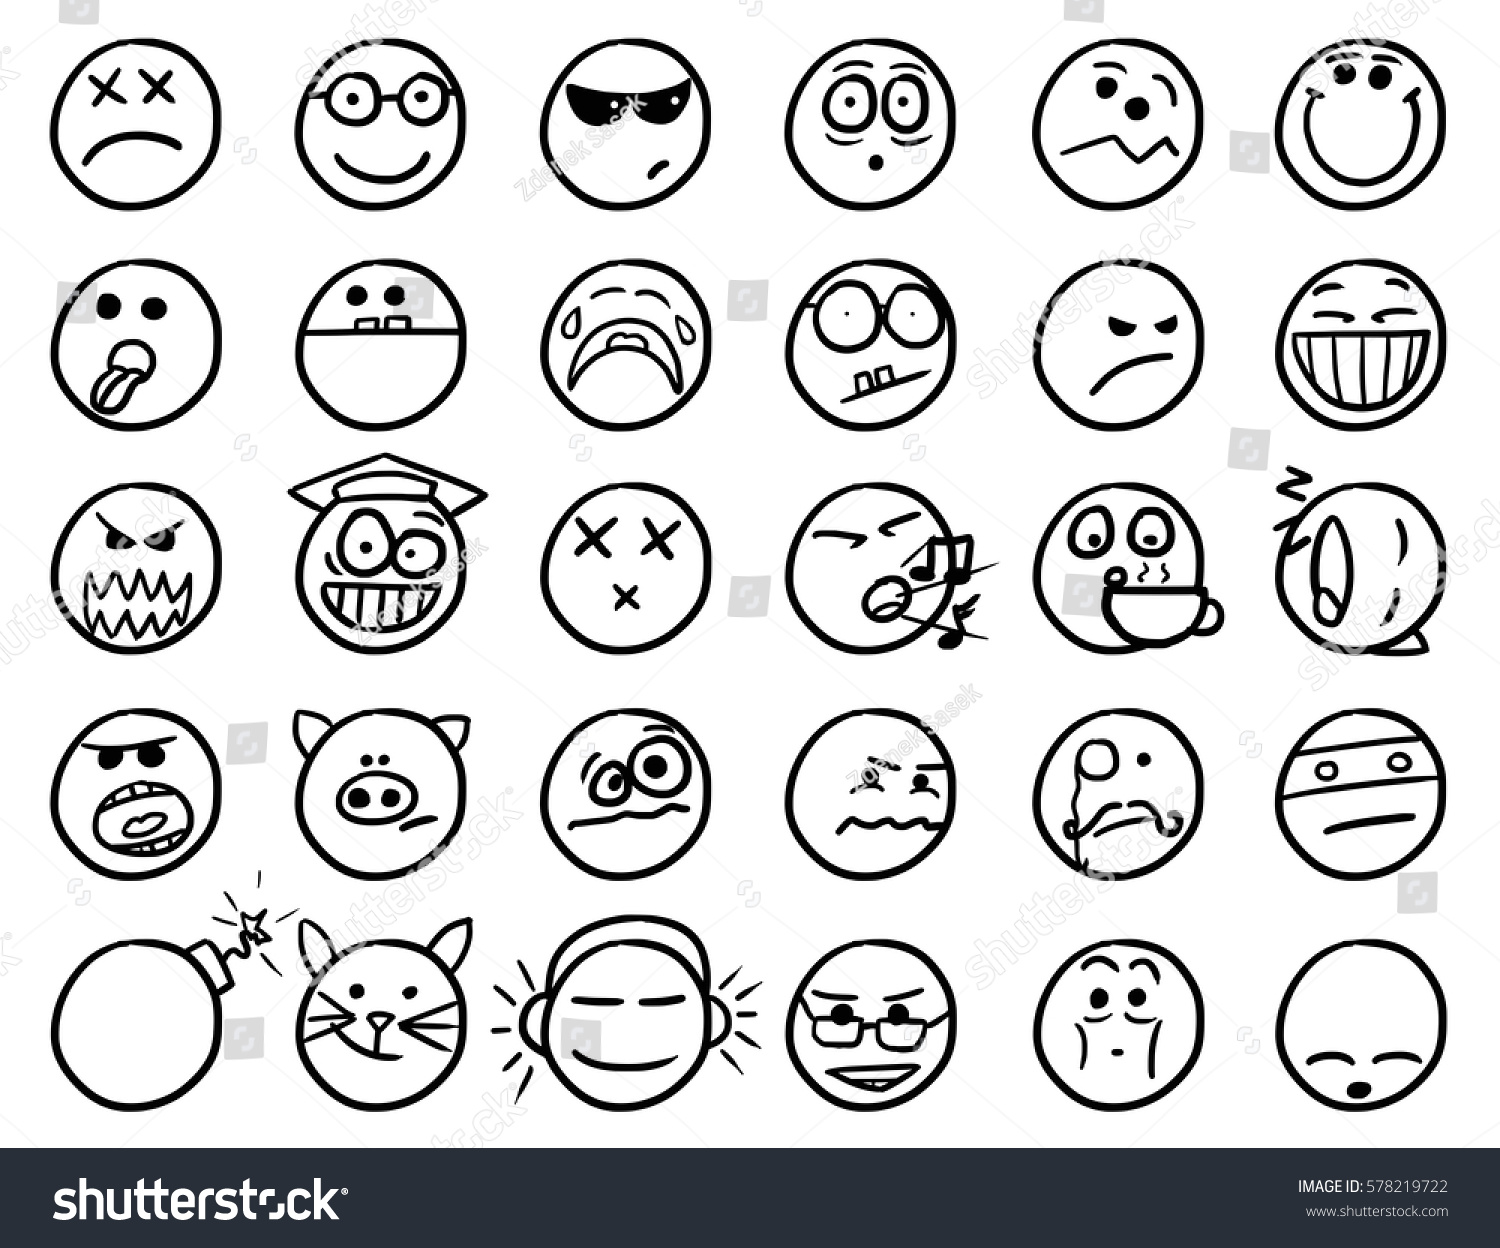 Set Smiley Icons Drawings Doodles Black Stock Vector 578219722 ...